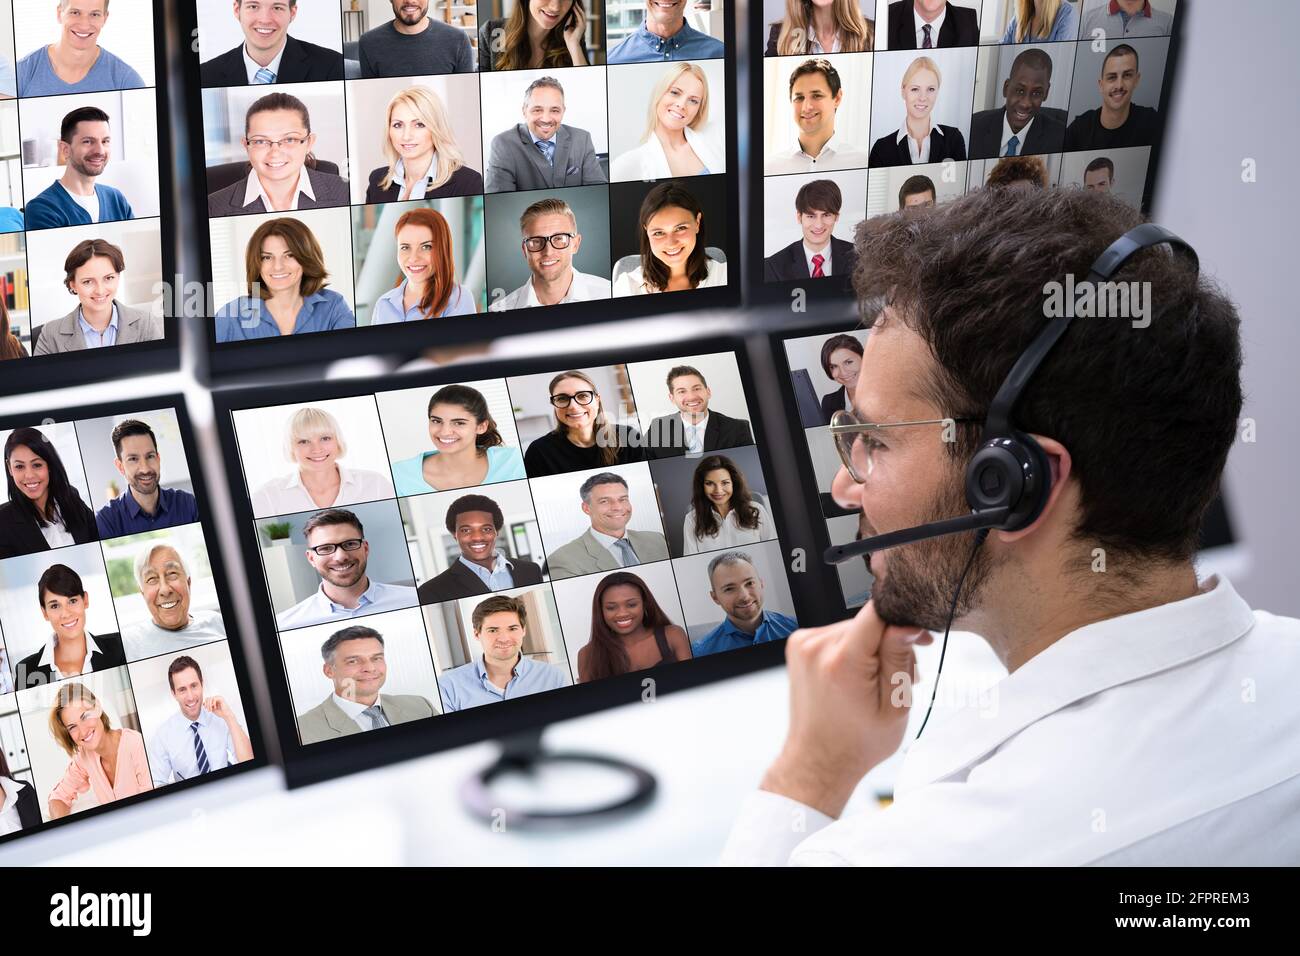 Video Conference Business Chat. Professional Man Videoconference Stock Photo